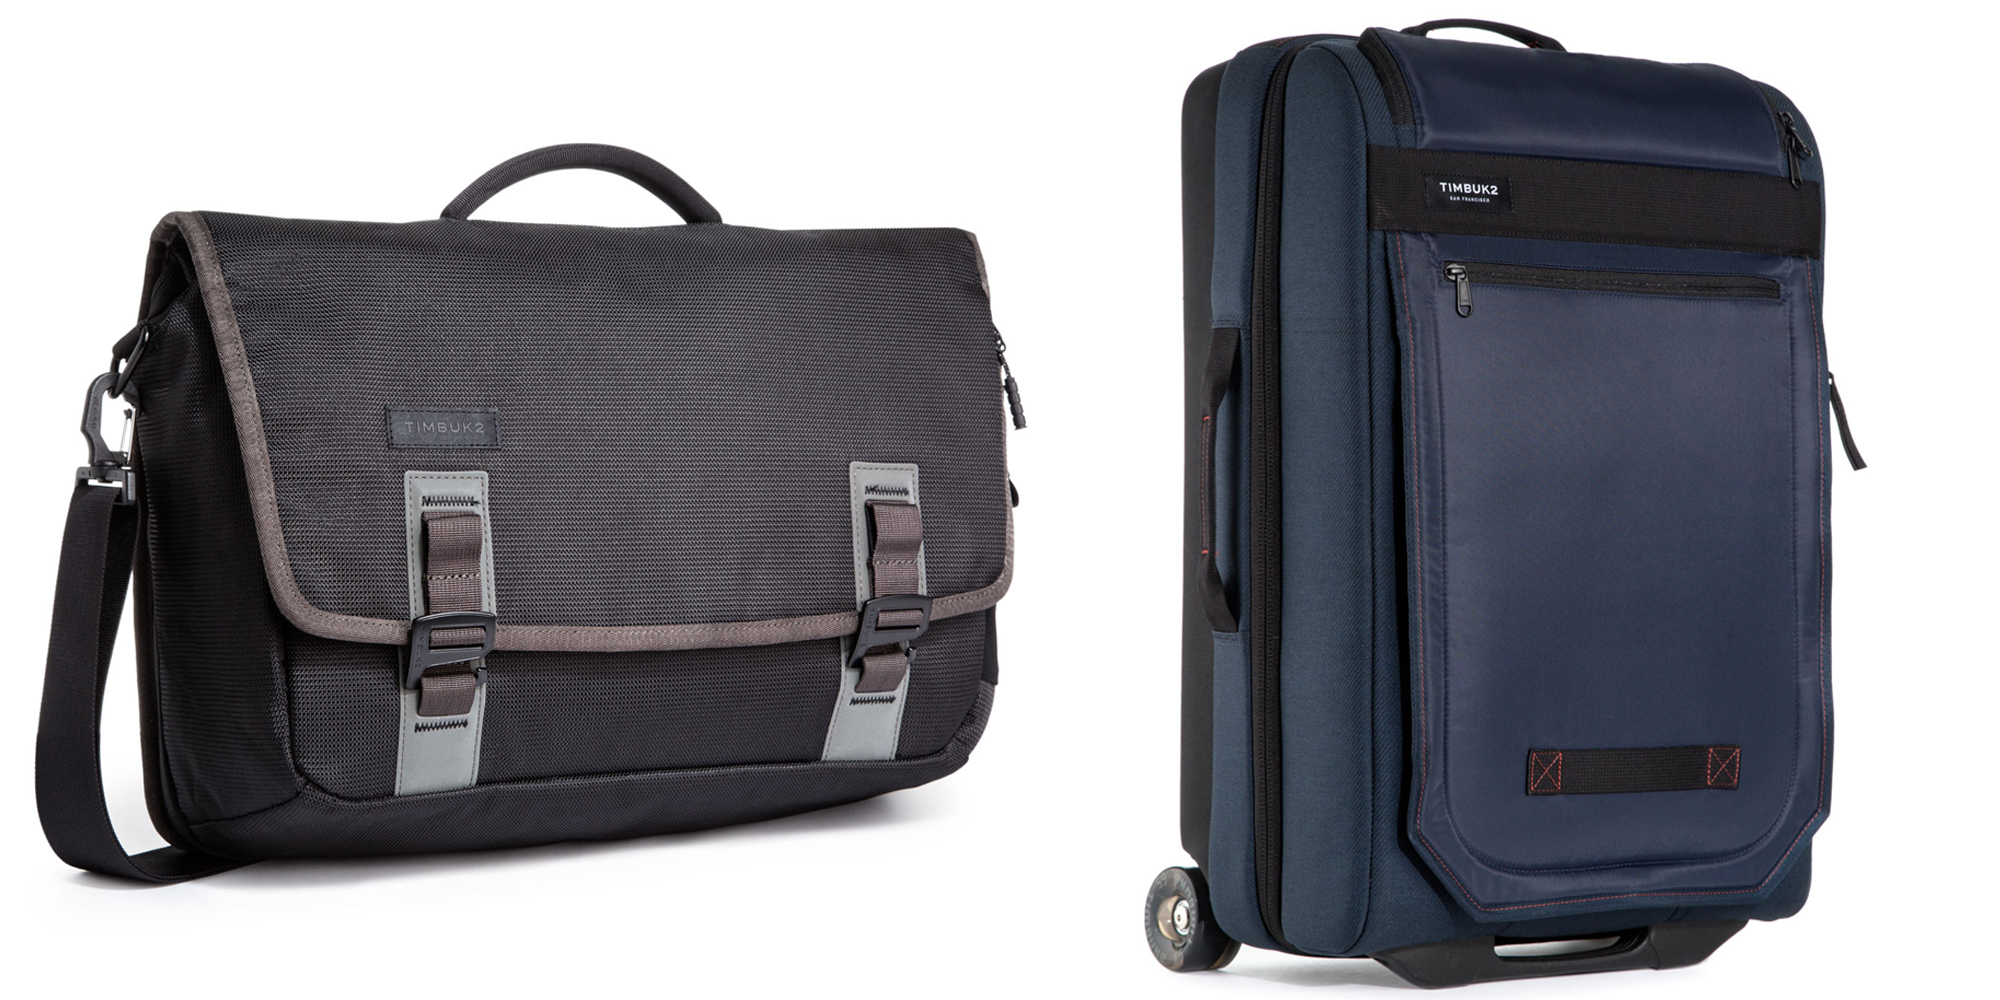 Timbuk2 takes up to 30% off MacBook bags, luggage, and more